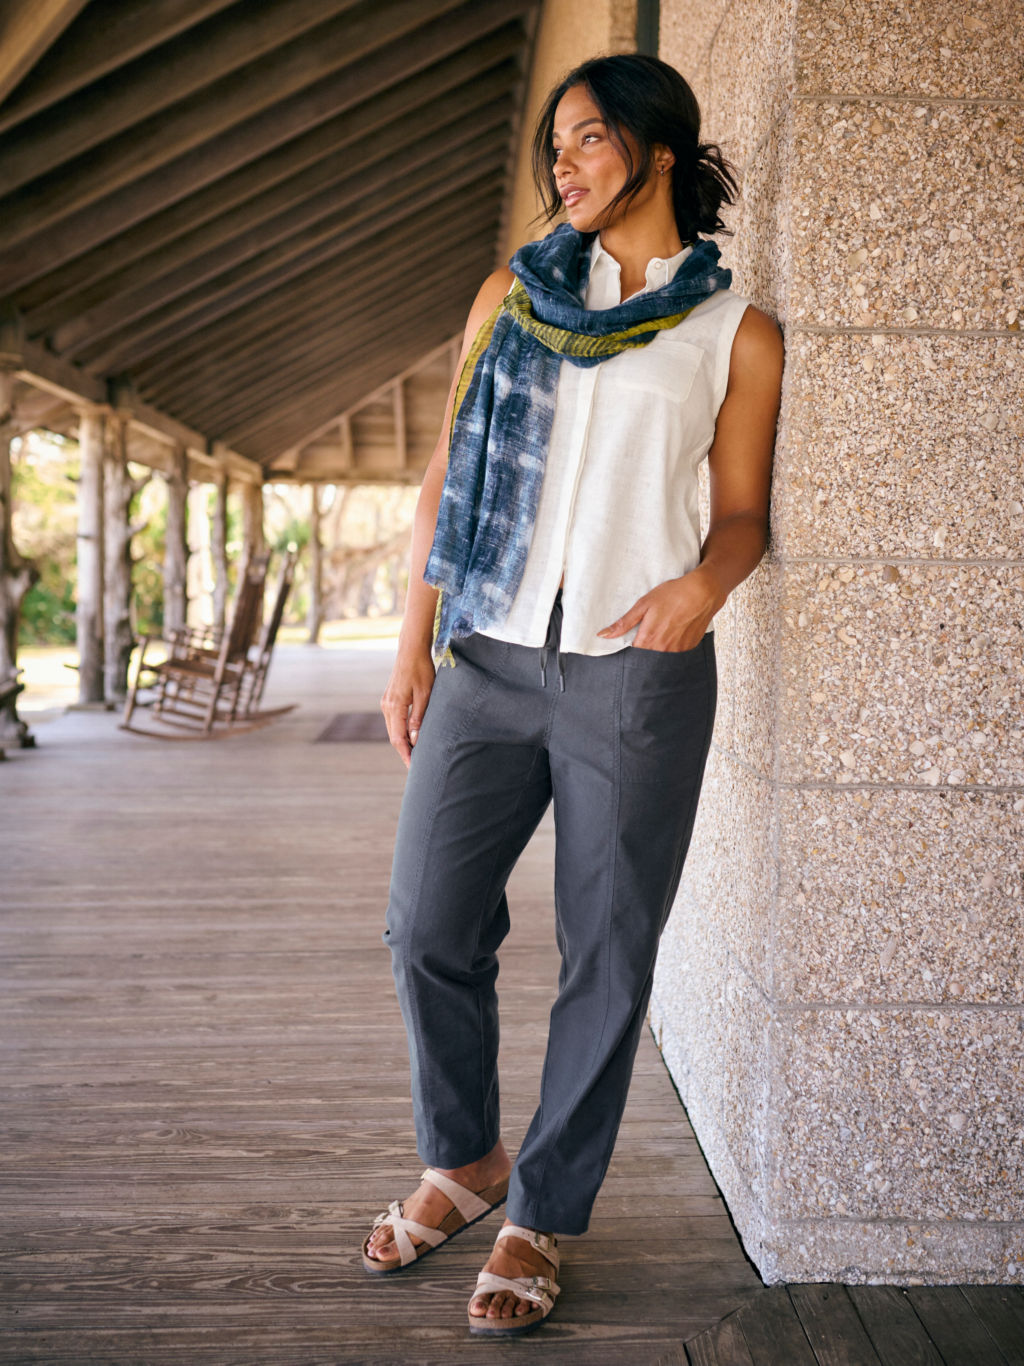 A model wearing a dark blue linen pants, a white linen sleeveless top, and a printed linen scarf leans against a stone wall on a porch.